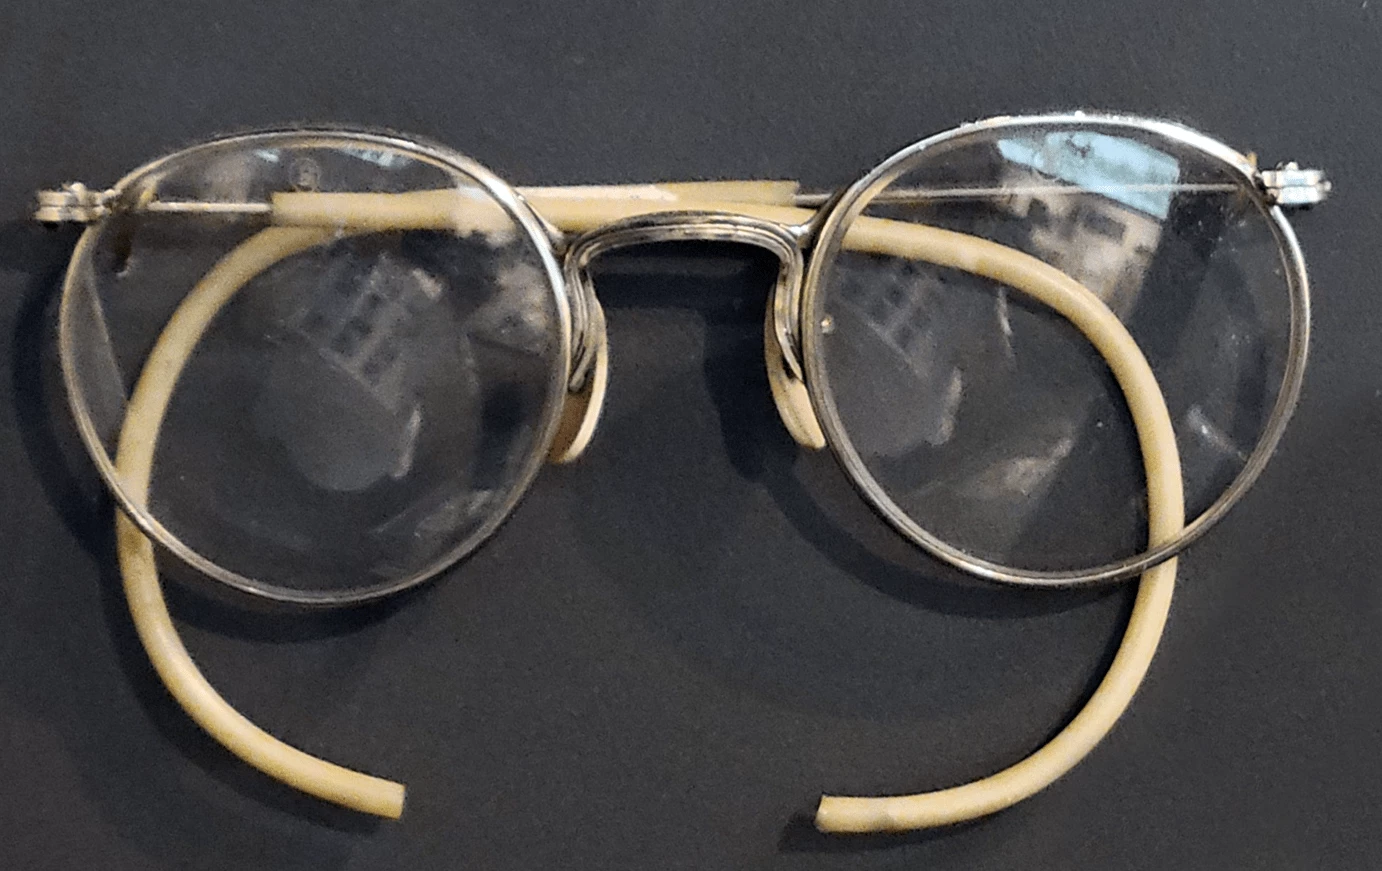 Round glasses with silver frame and white rubber ear rests